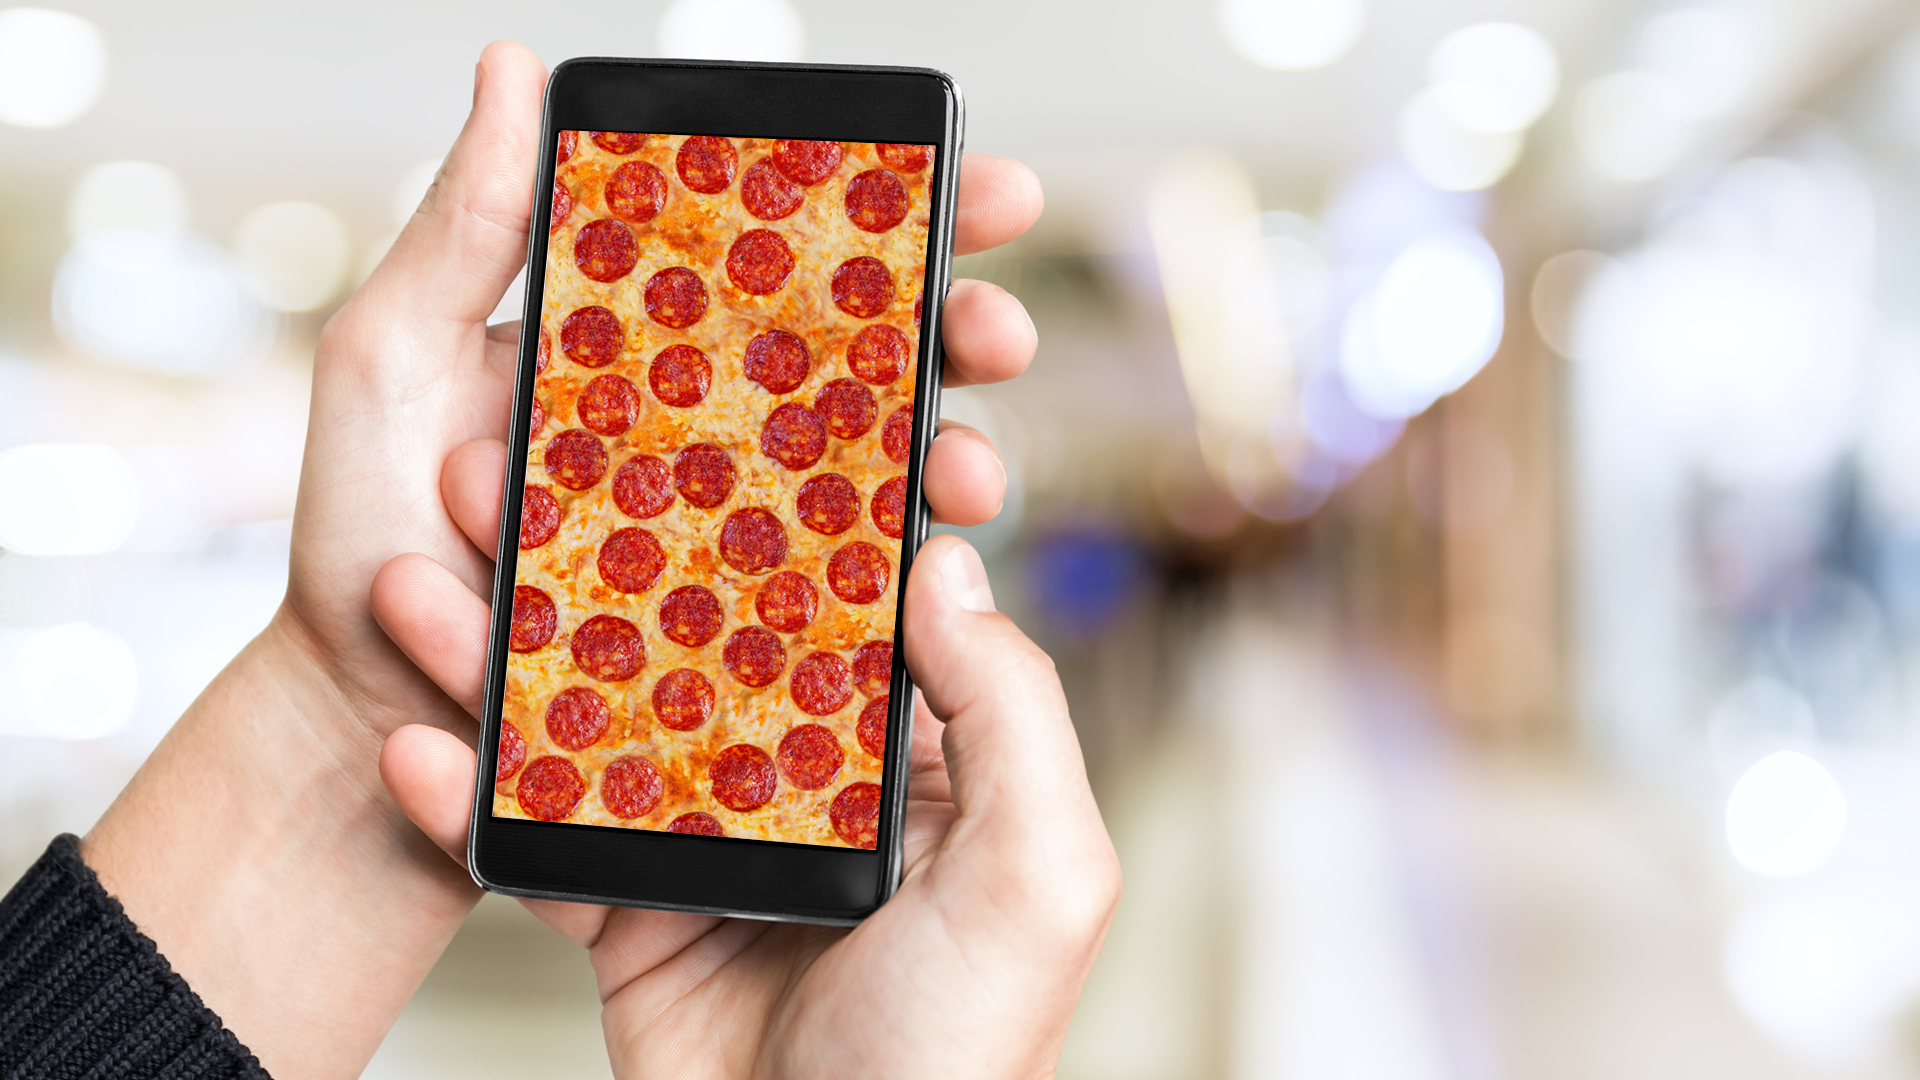 A person holding a mobile phone showing a slice of pizza